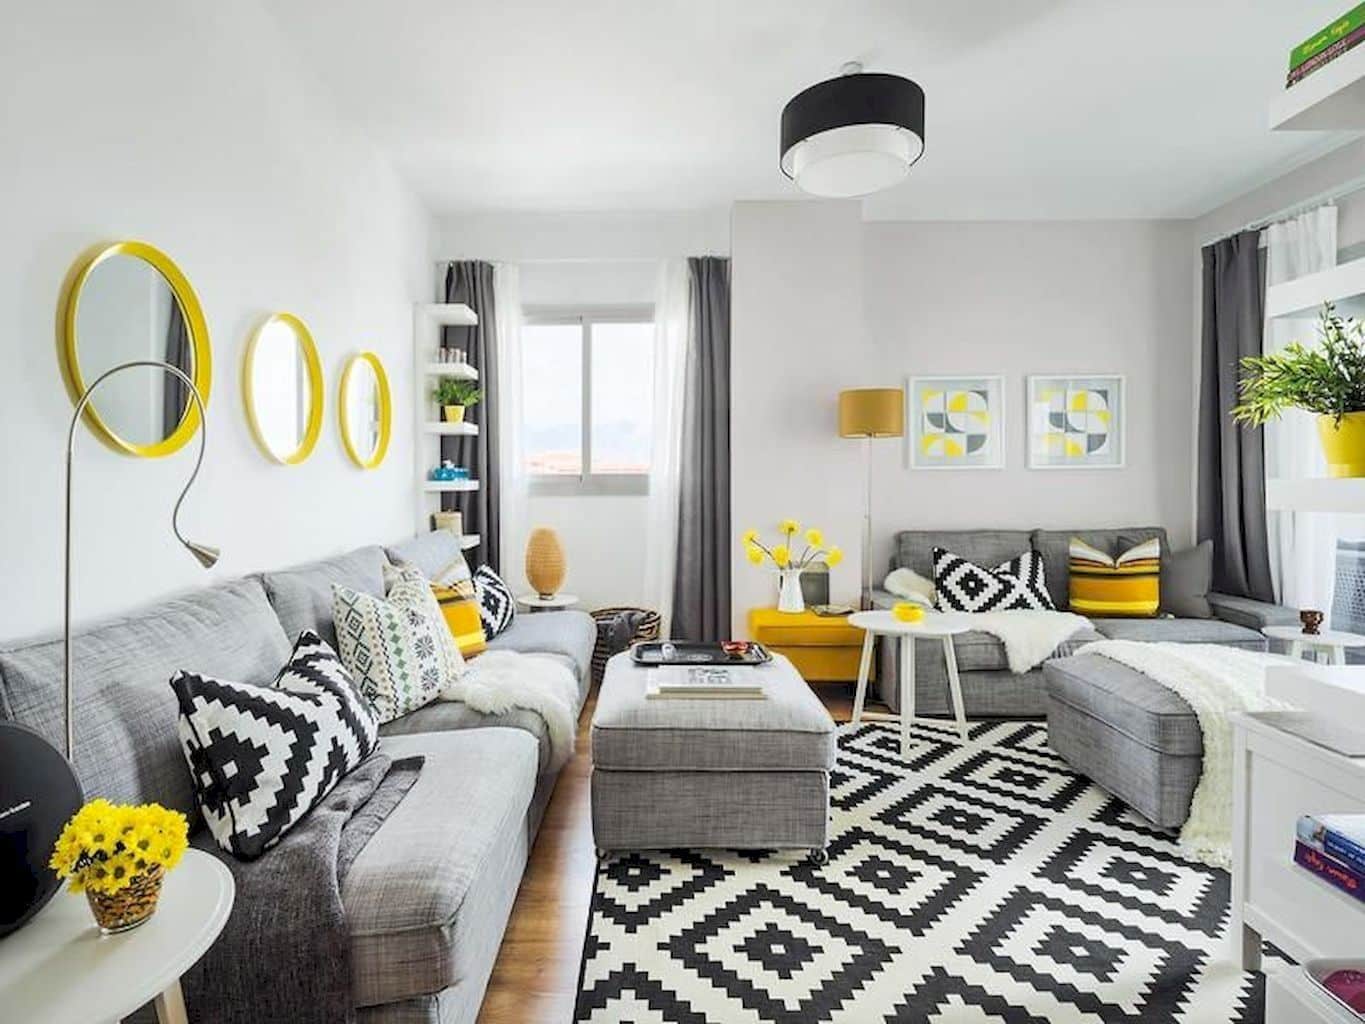 Linear and square patterns on the rug and pillows for gray colored living with slight yellow accent in the form of mirrors